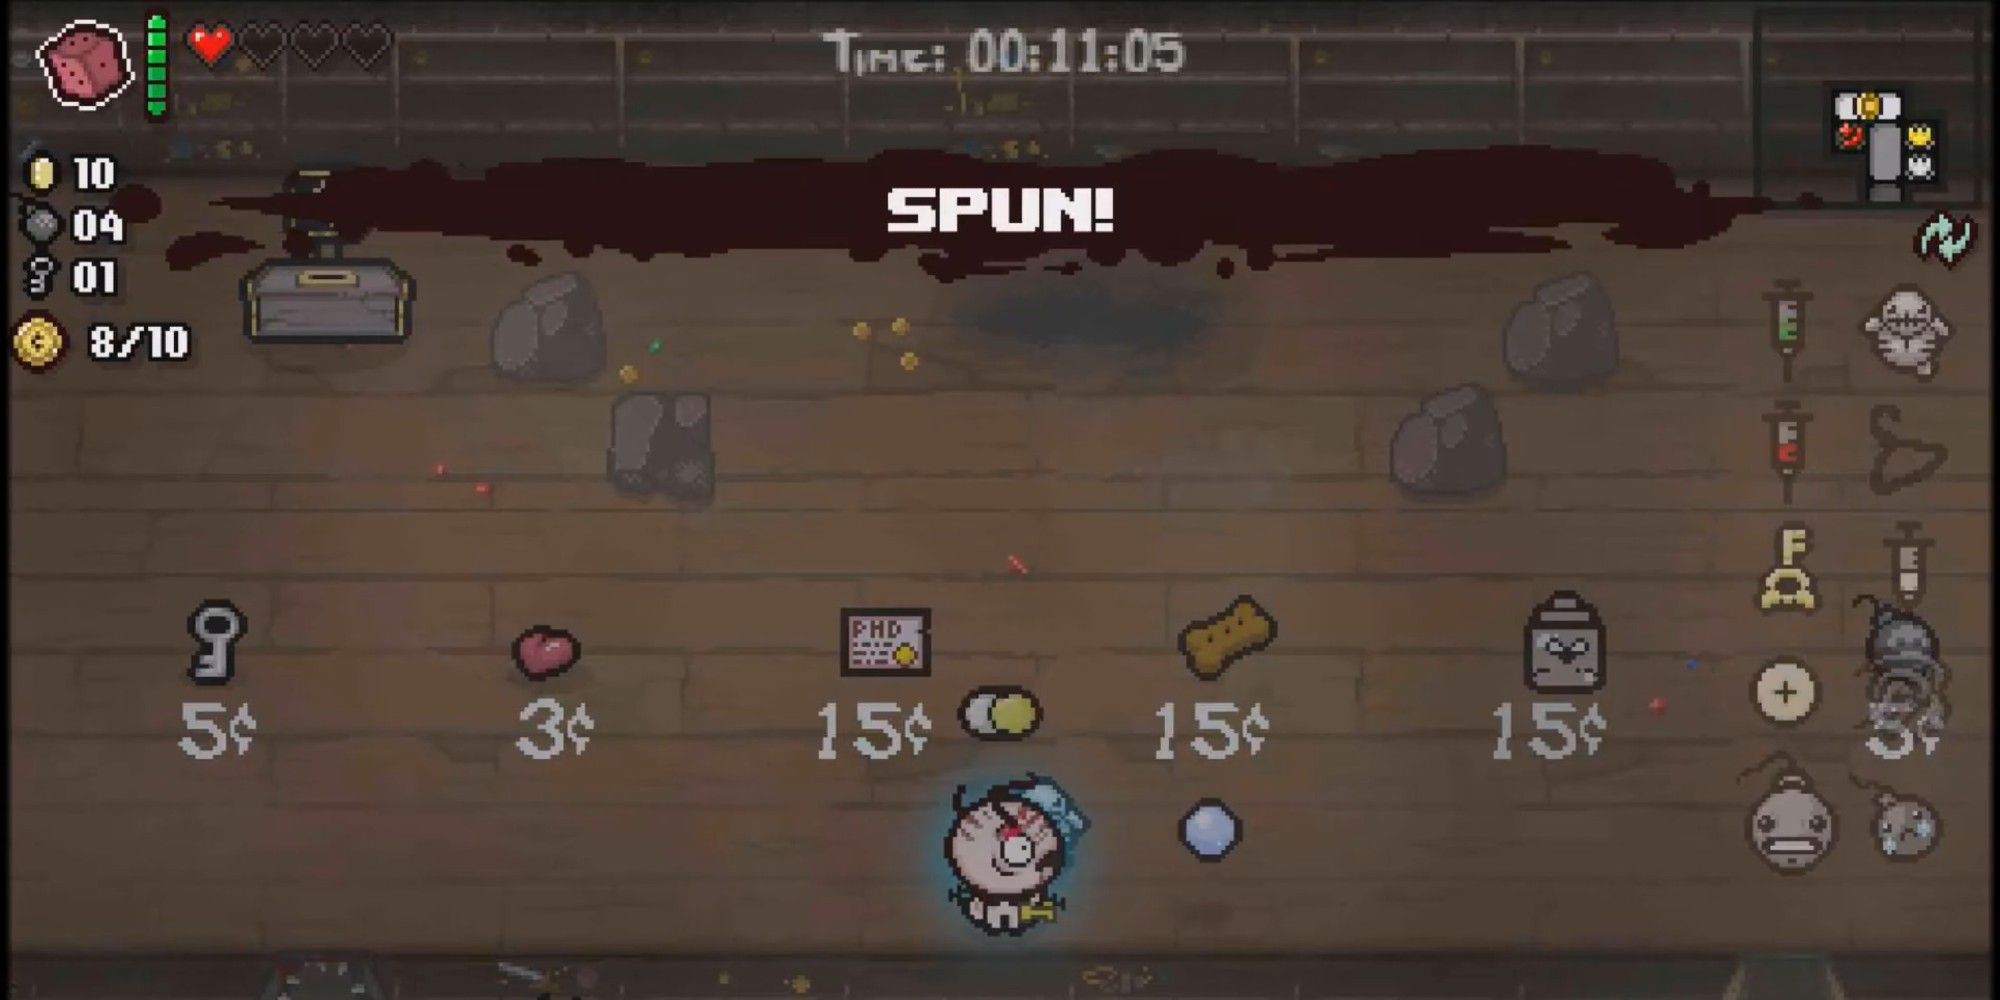 The Binding of Isaac Spun Transformation in the shop in greed mode